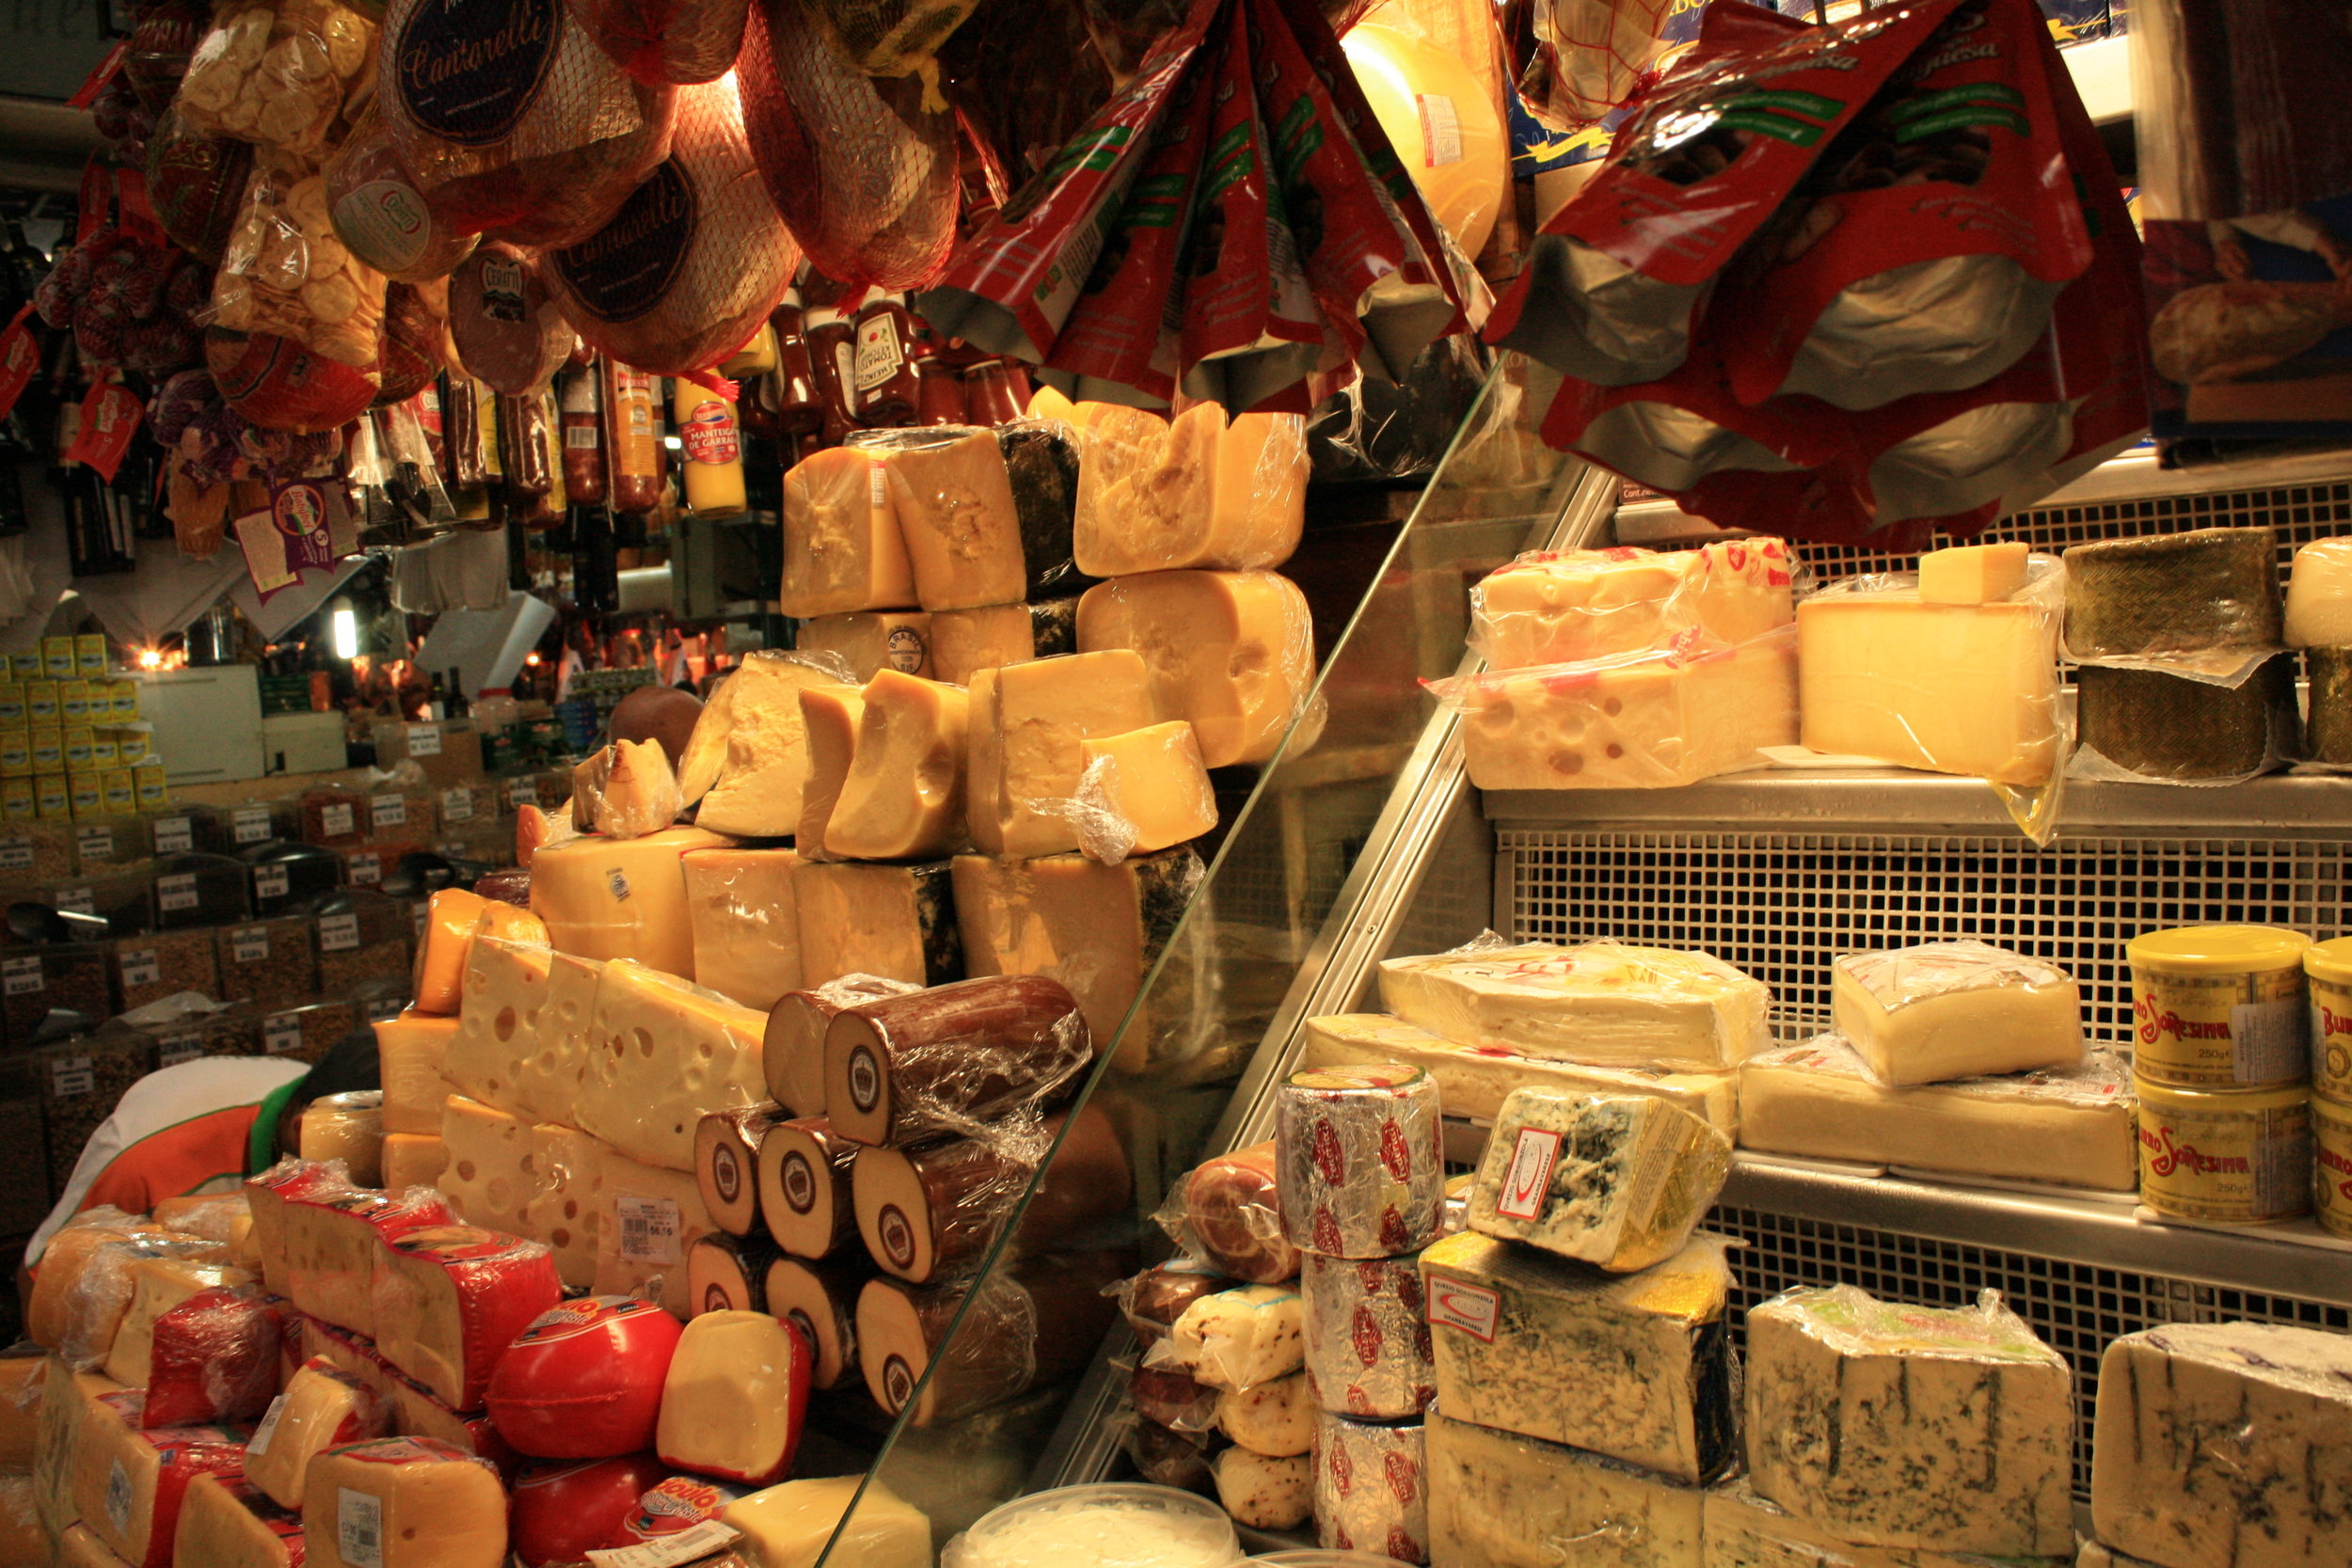 Municipal Market of São Paulo cheese and meats